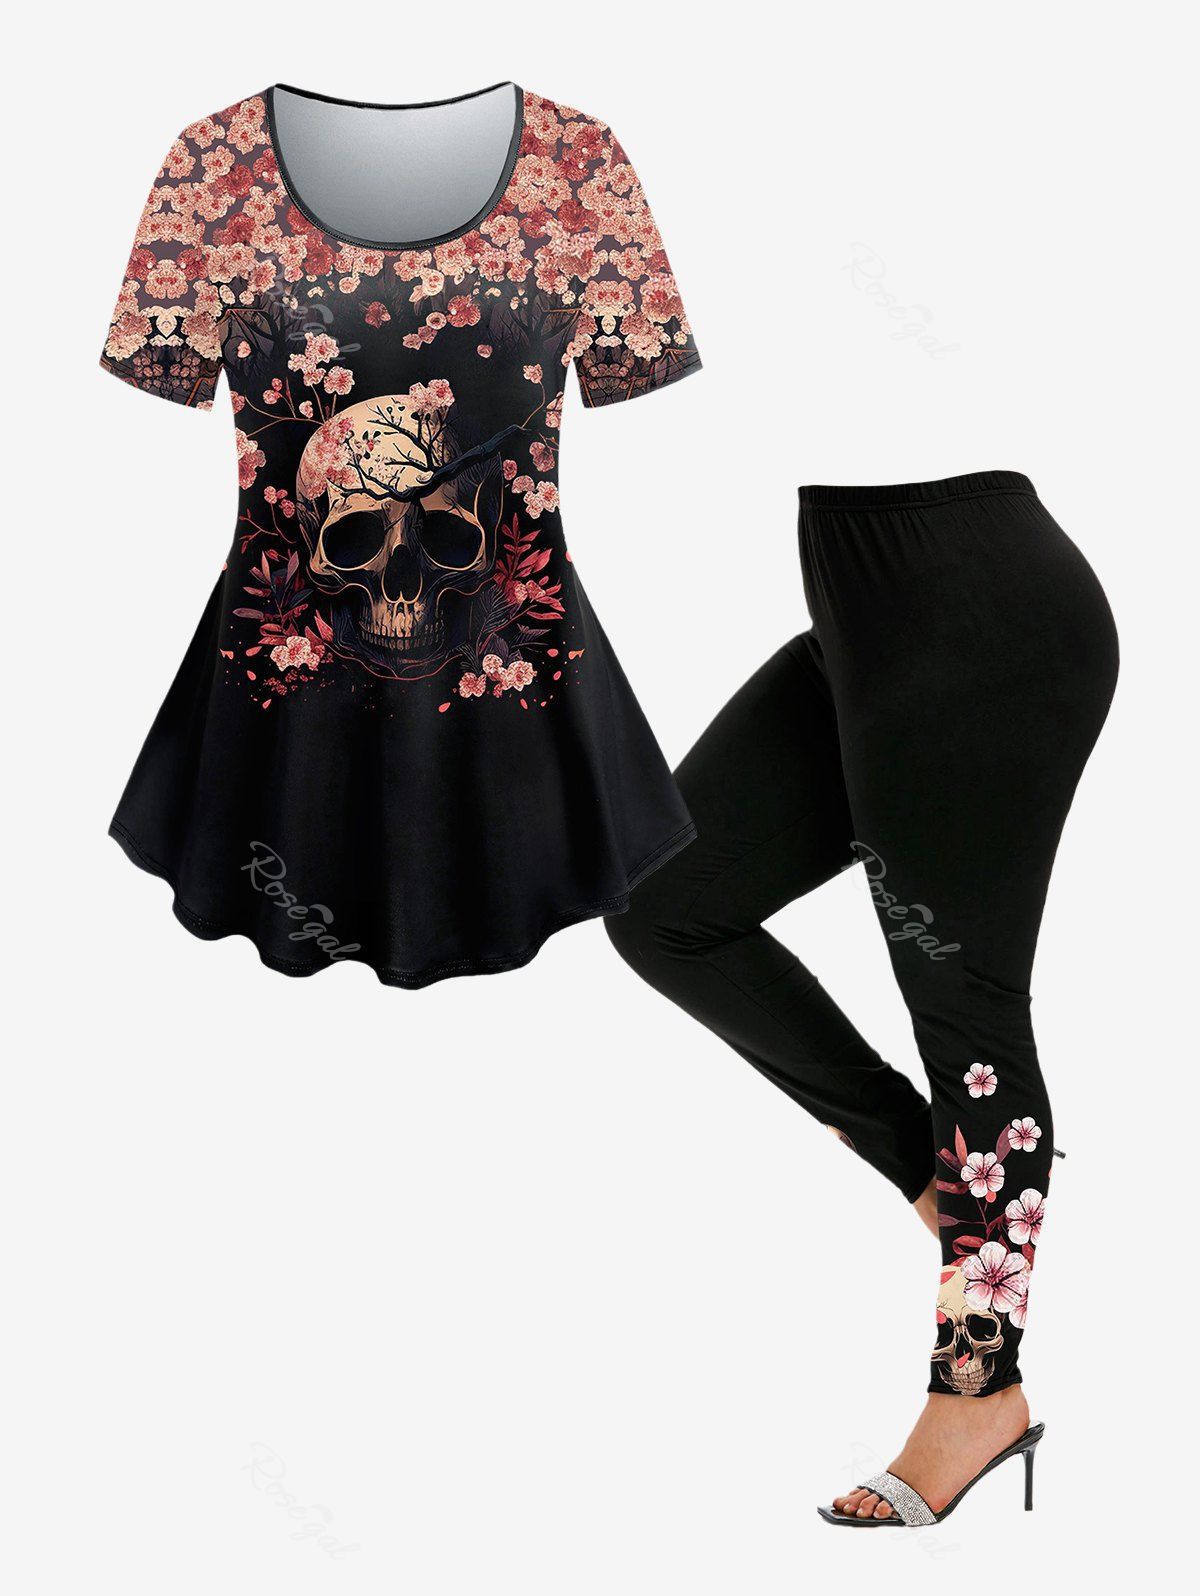 New Gothic Floral Skull Print T-shirt and Floral Skull Print Leggings Outfit  